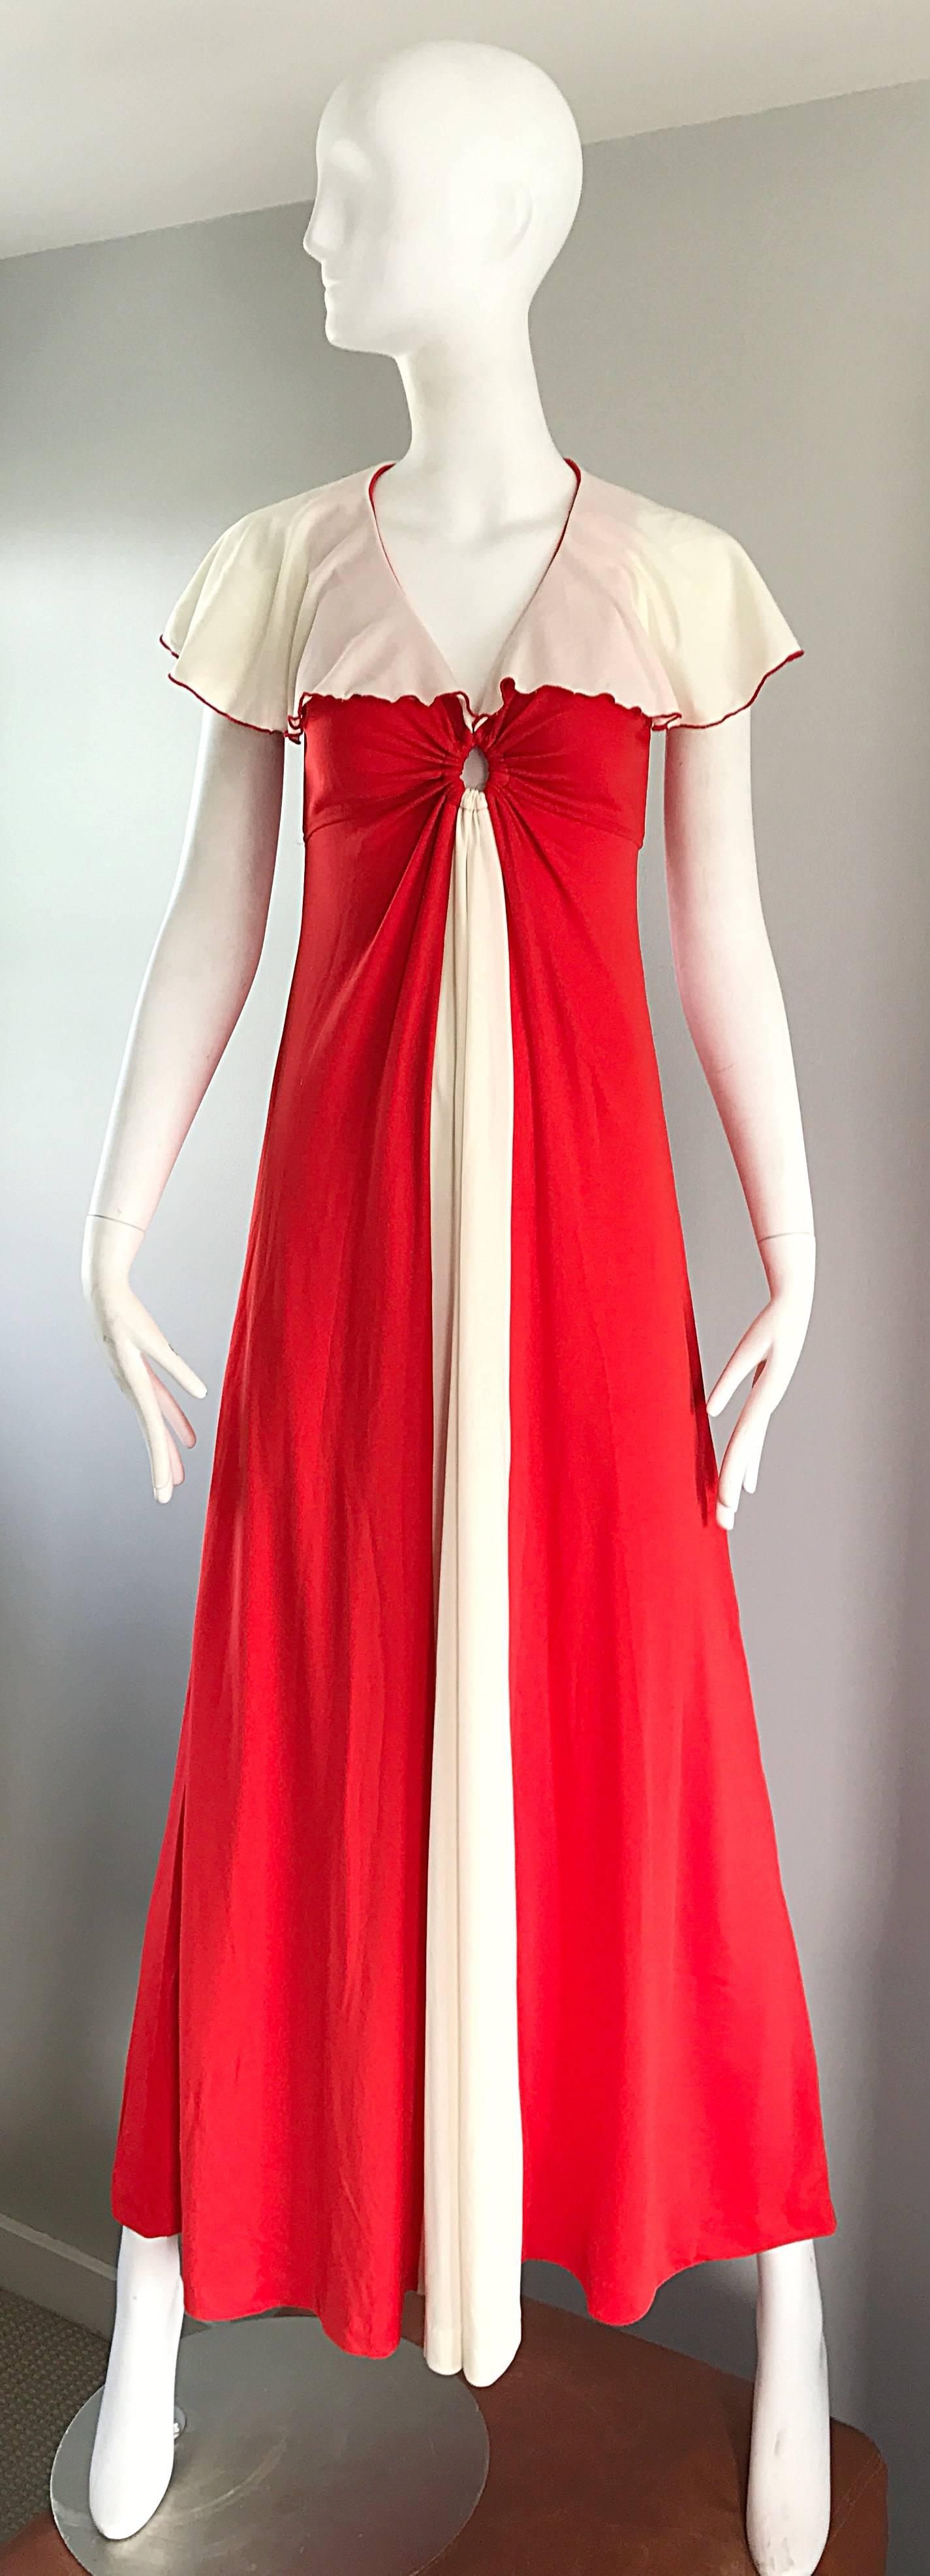 Amazing GIORGIO DI SANT ANGELO 1970s orange and white jersey color block maxi dress! Features a bright orange jersey, with a panel of white down the center, and a white caplet. Keyhole at center bust reveals just the right amount of skin. Hidden